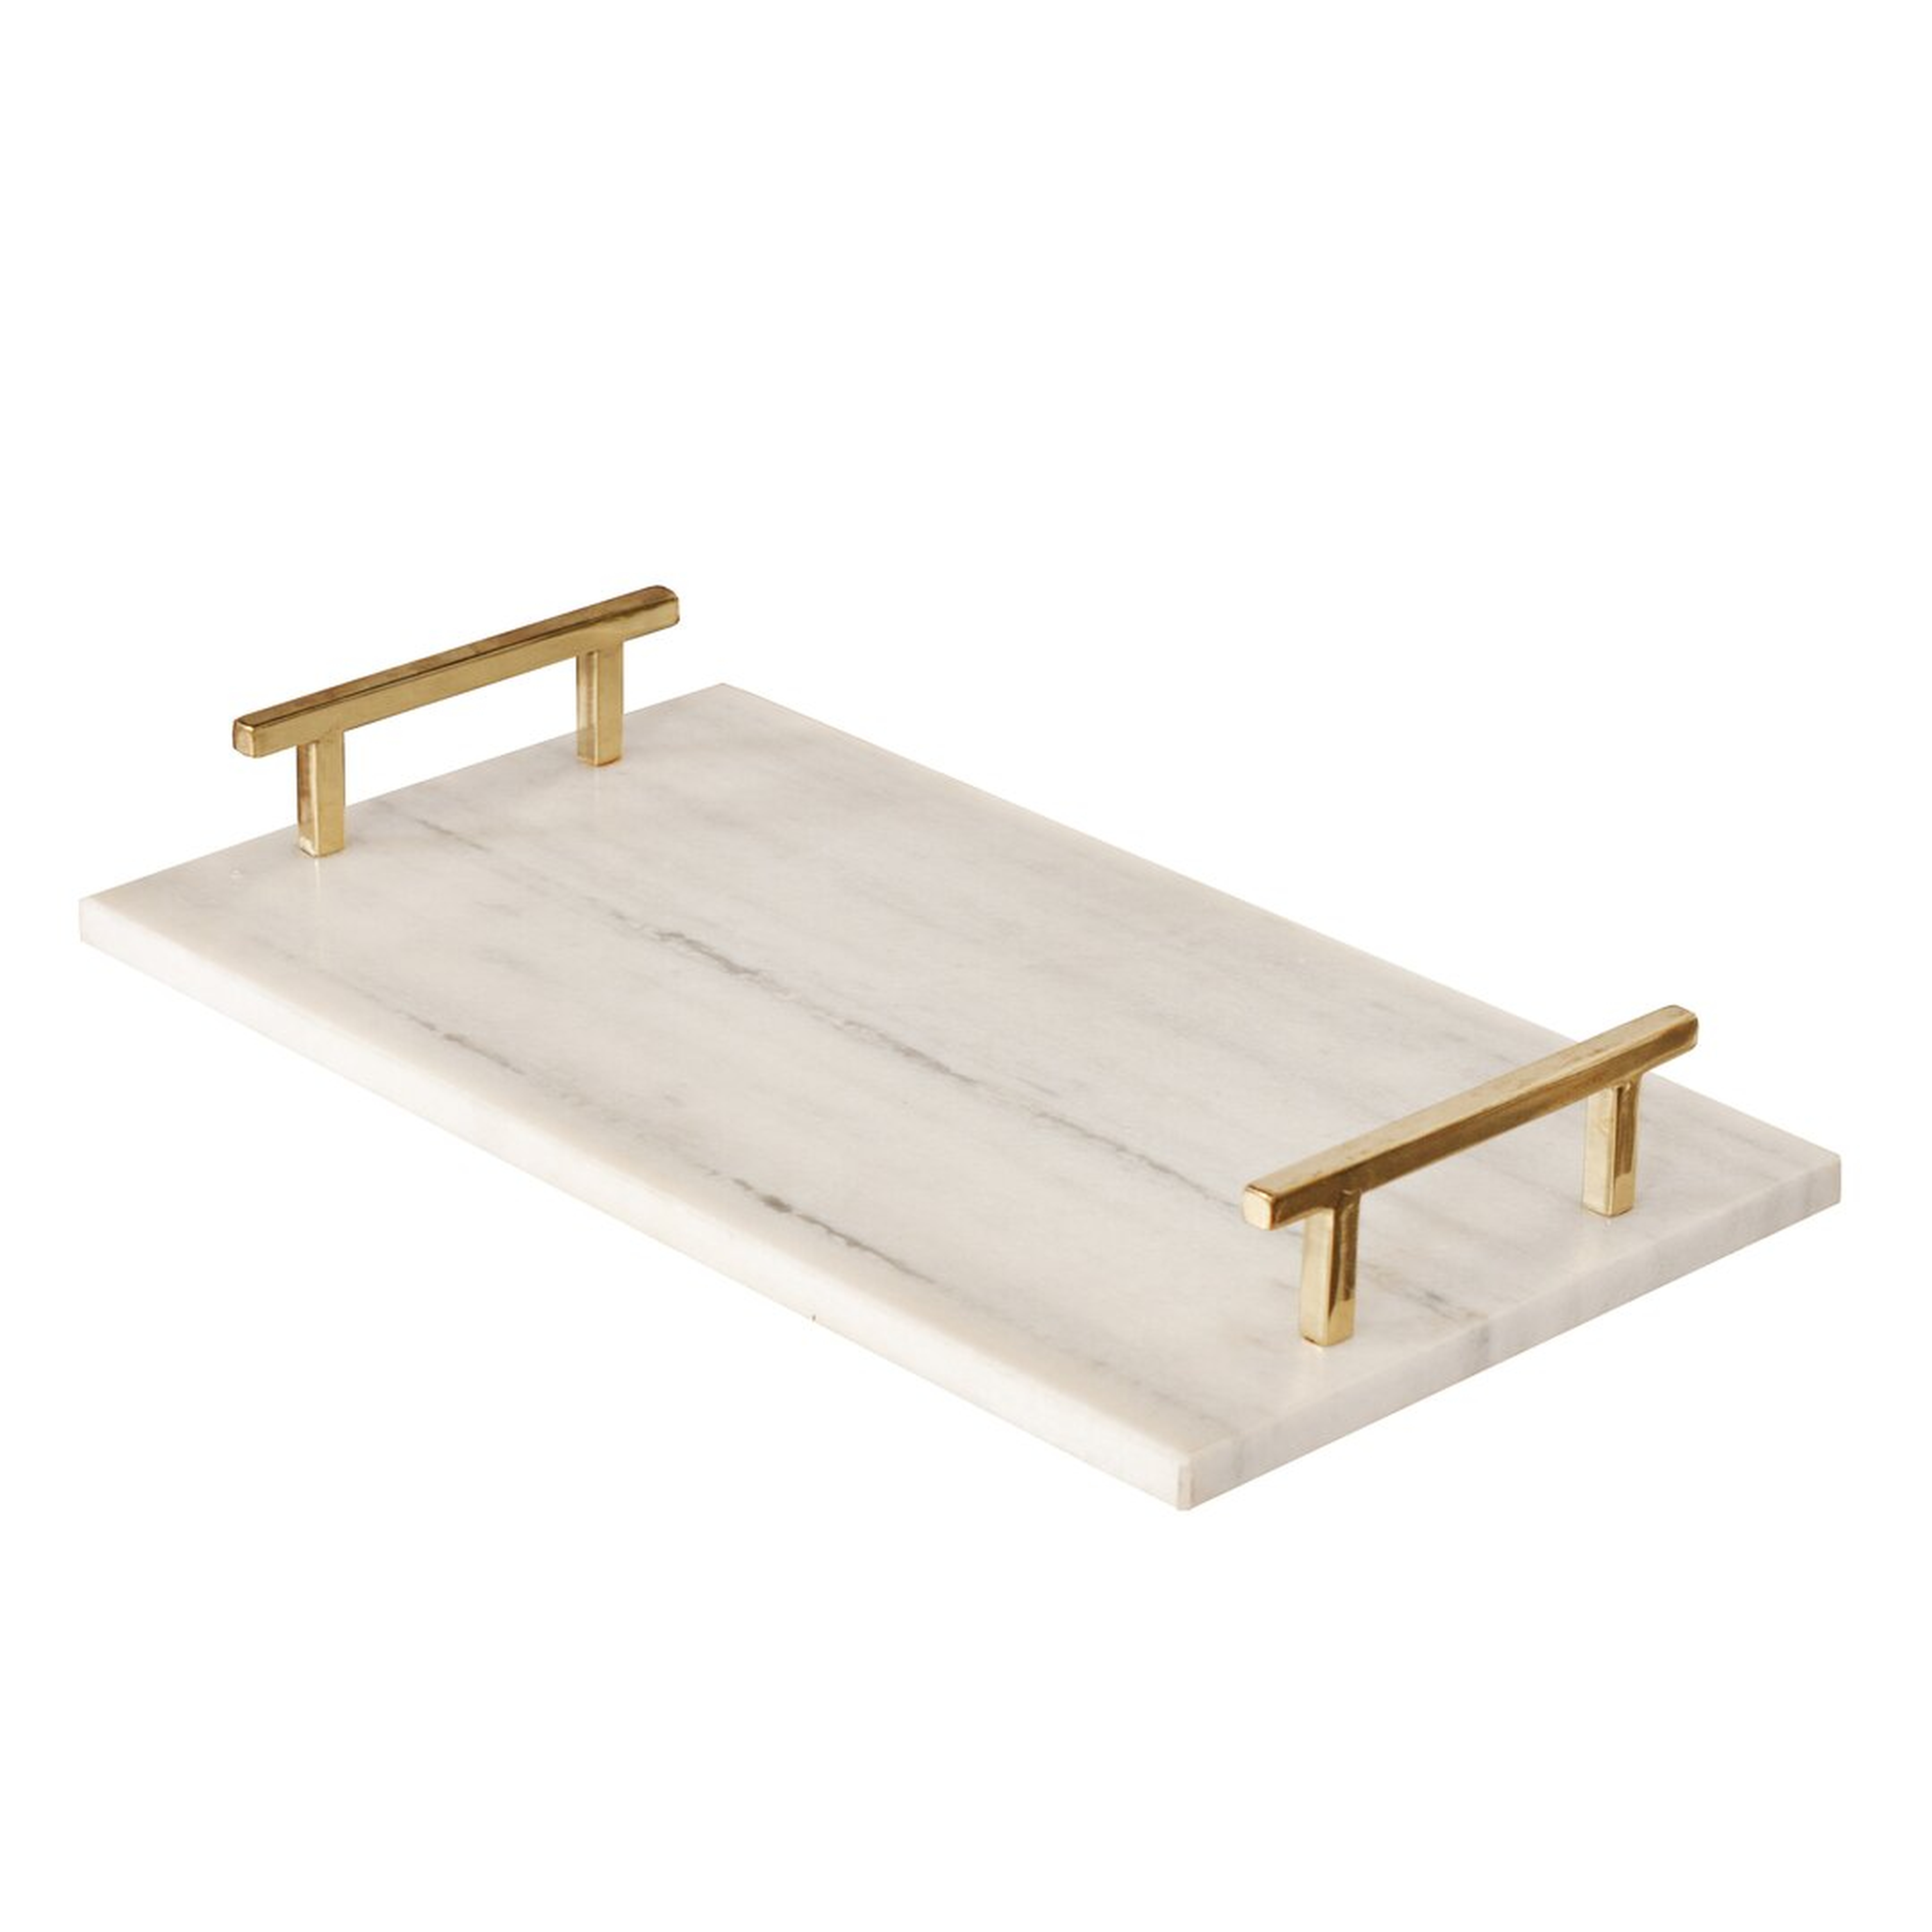 "Worlds Away Lincoln Coffee Table Tray" - Perigold